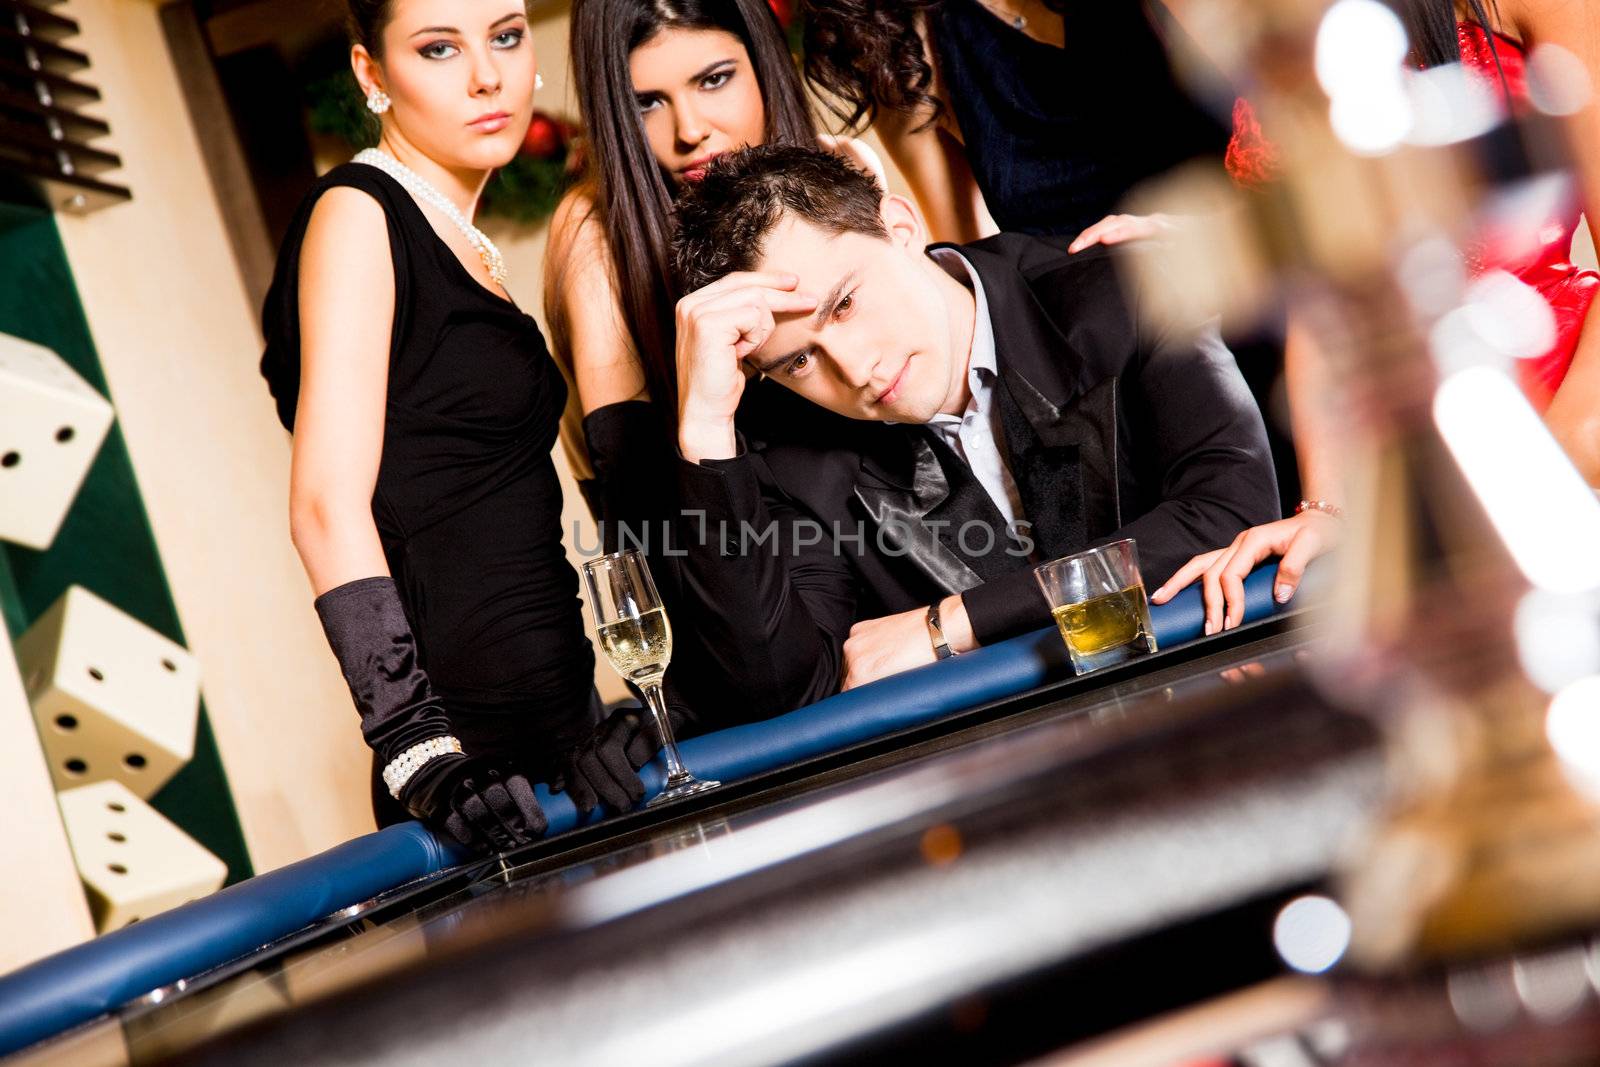 Group of young people behind roulette table